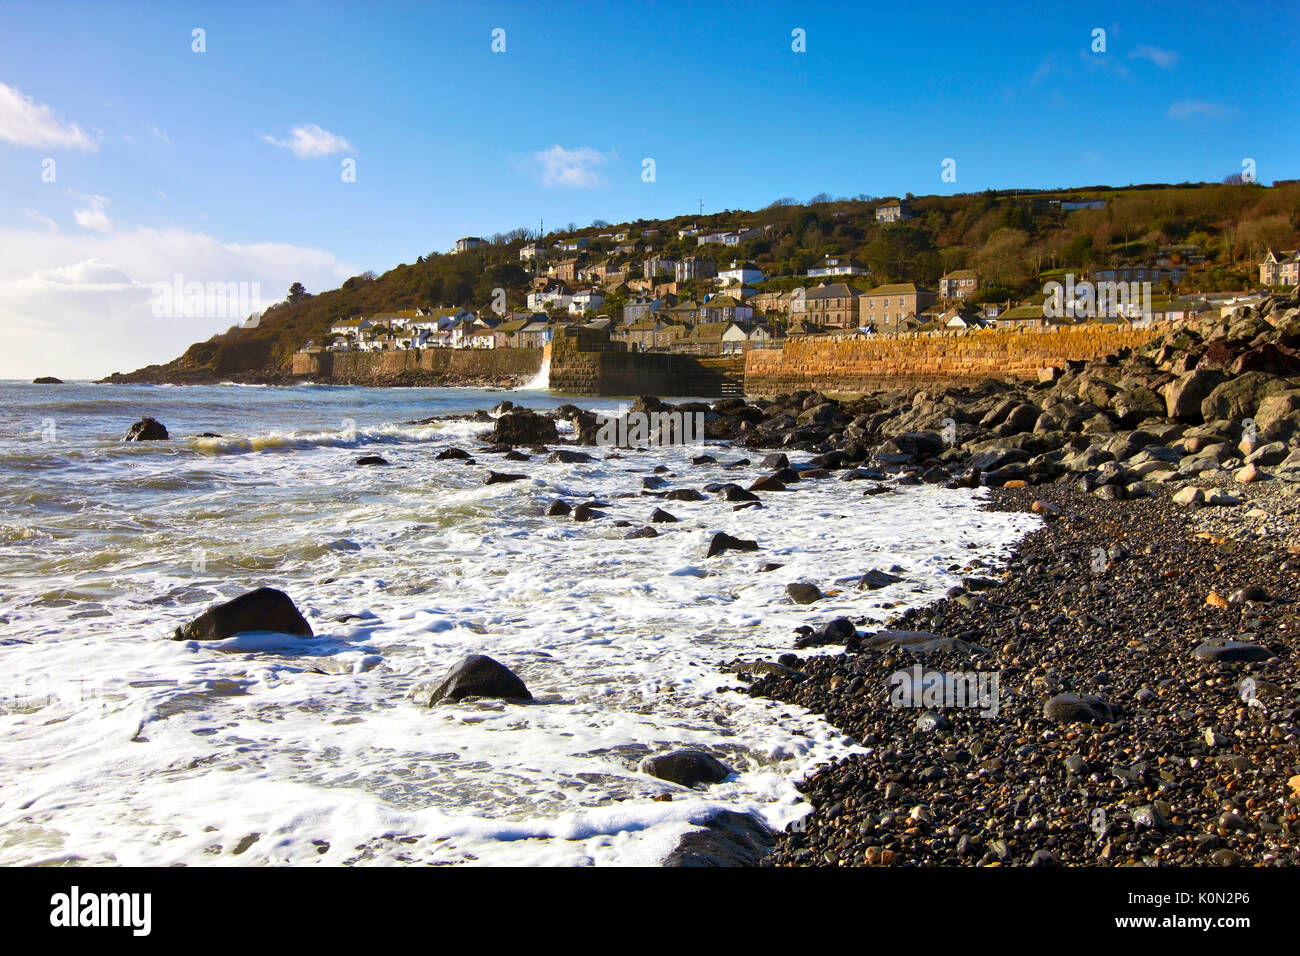 A view along the pebbled coast of Mousehole, Cornwall, UK Stock Photo